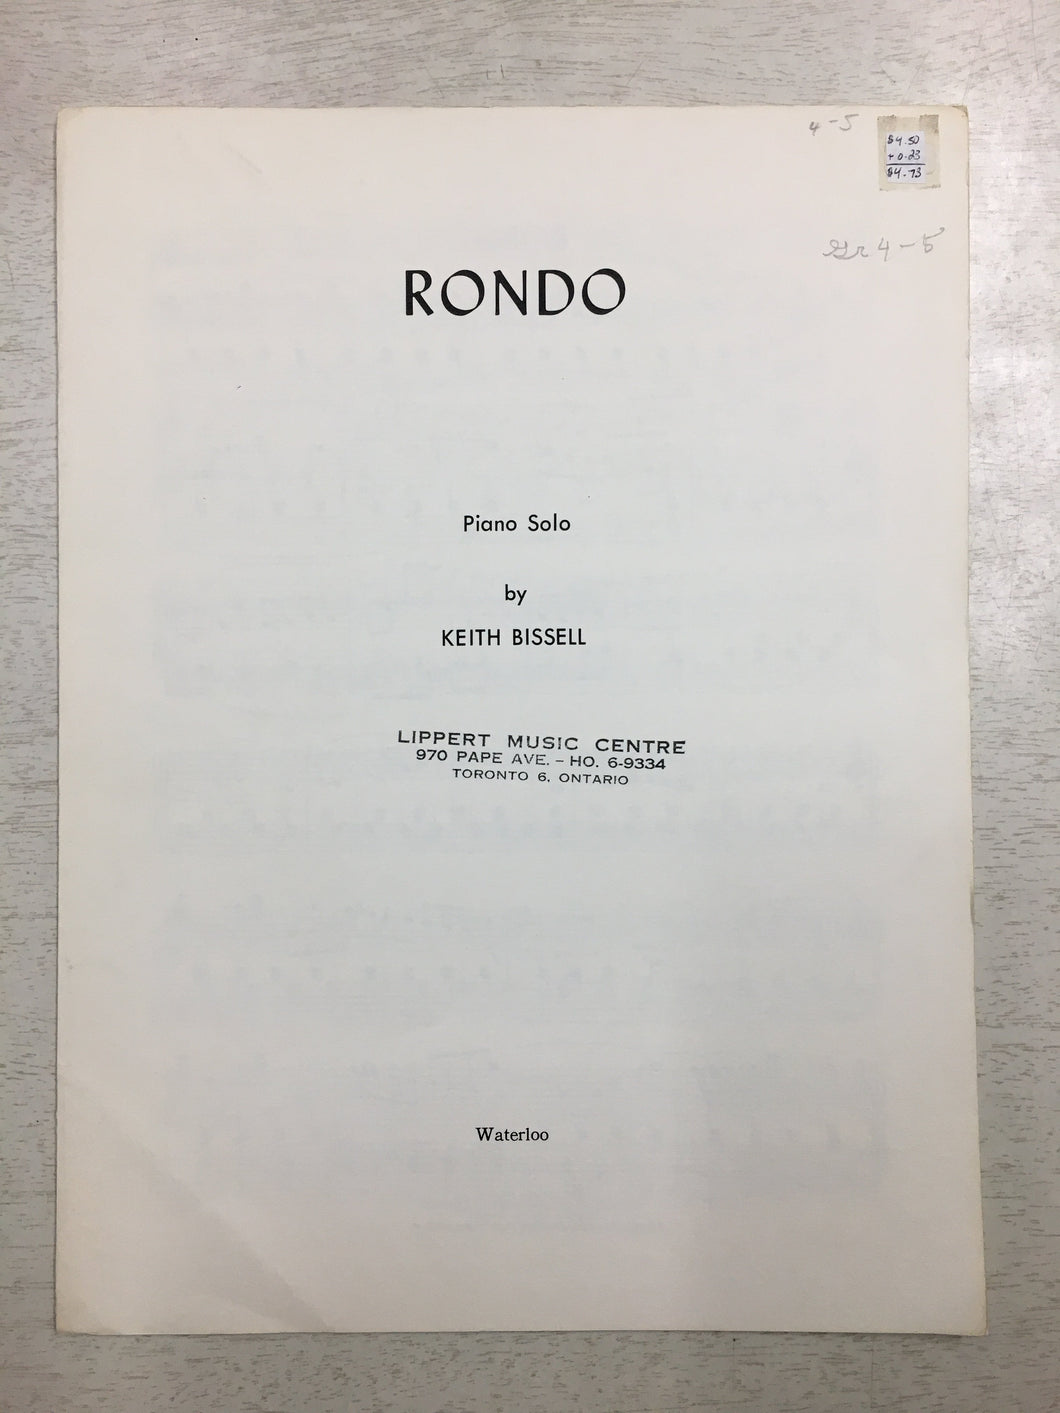 Rondo, Keith Bissell